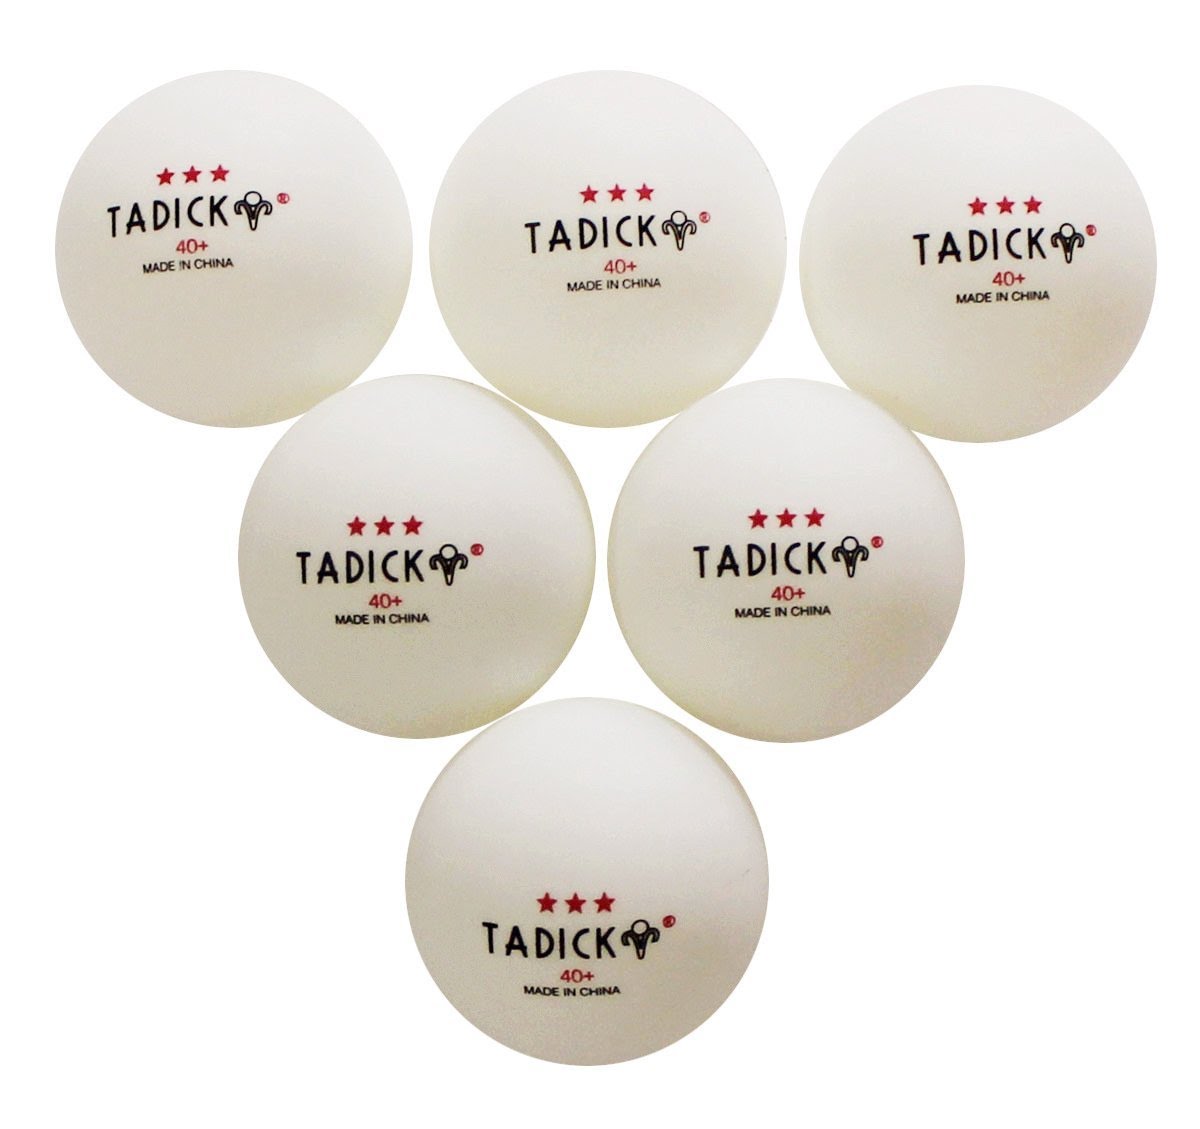 Double Happiness 3 Star Table Tennis Balls - 6/Pkg